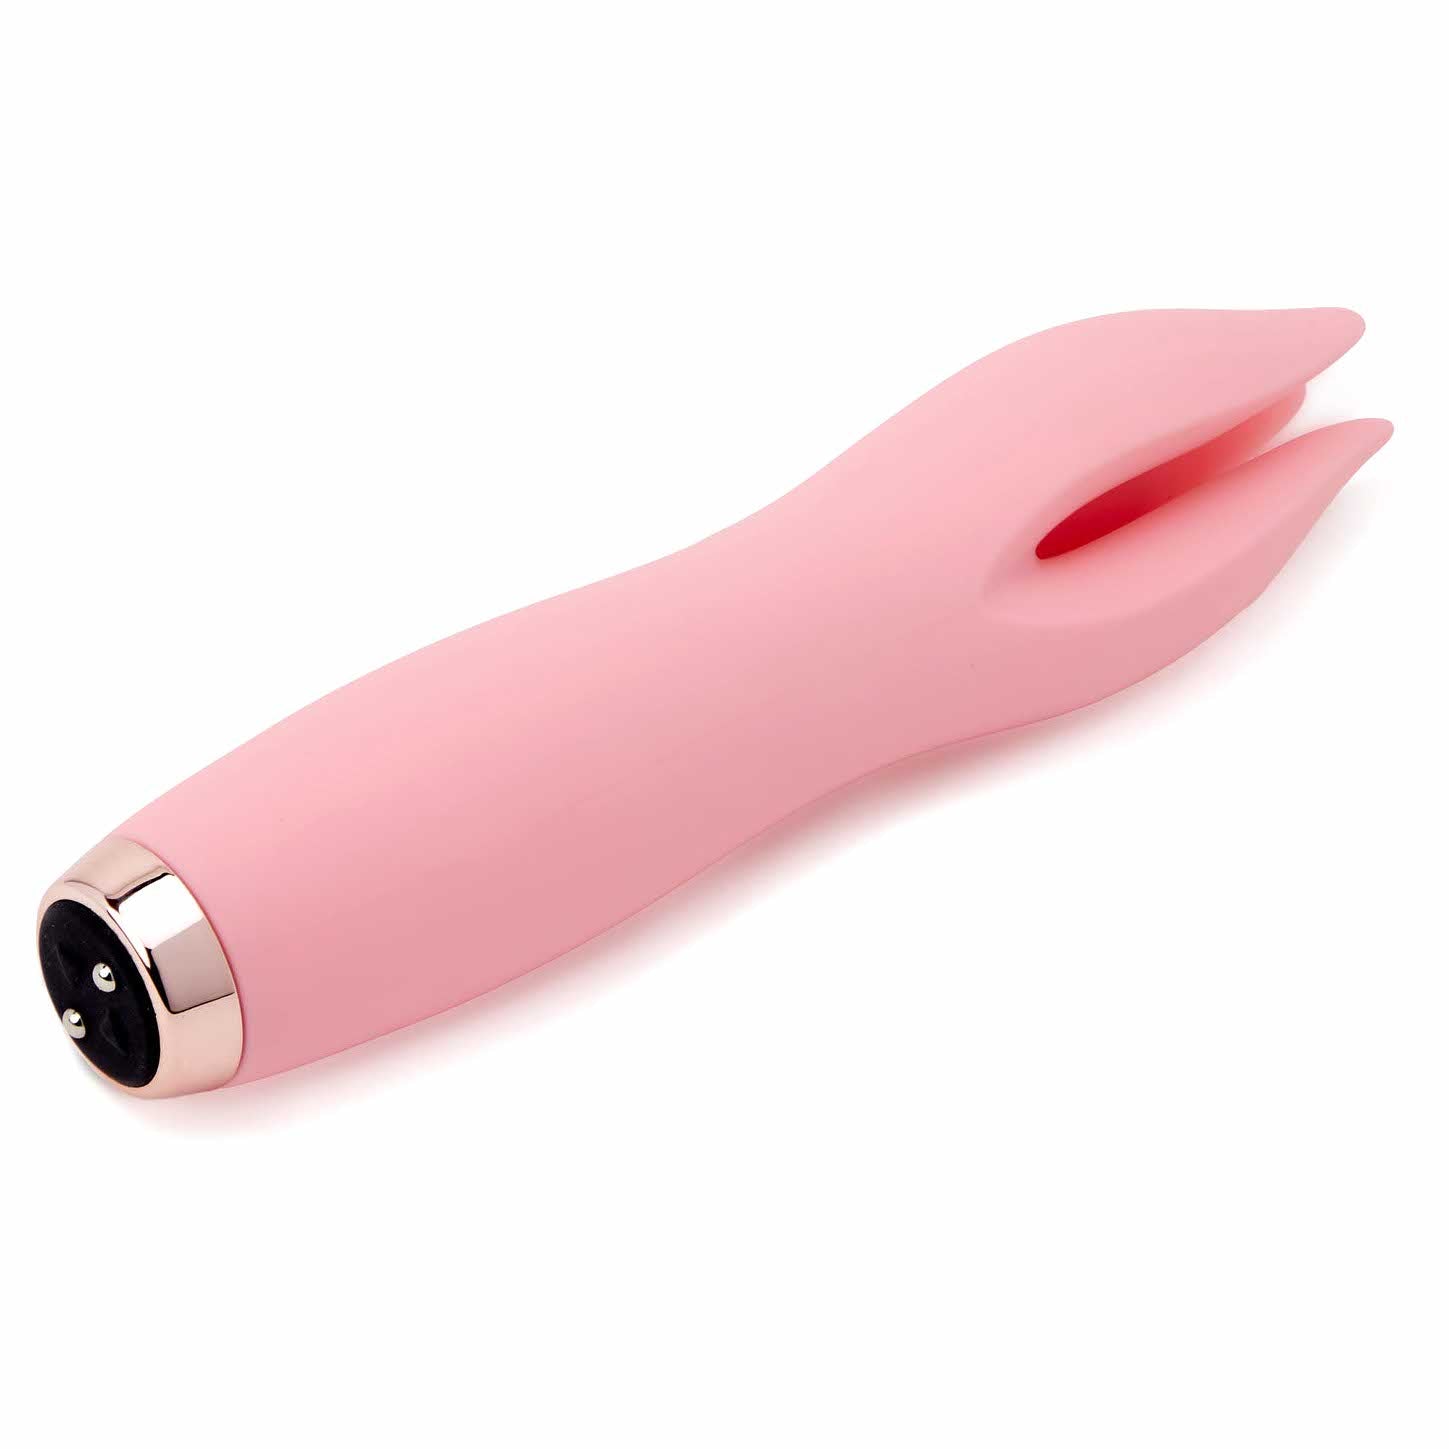 angled view of the nu sensuelle tulip bt-w81mpk millenial pink